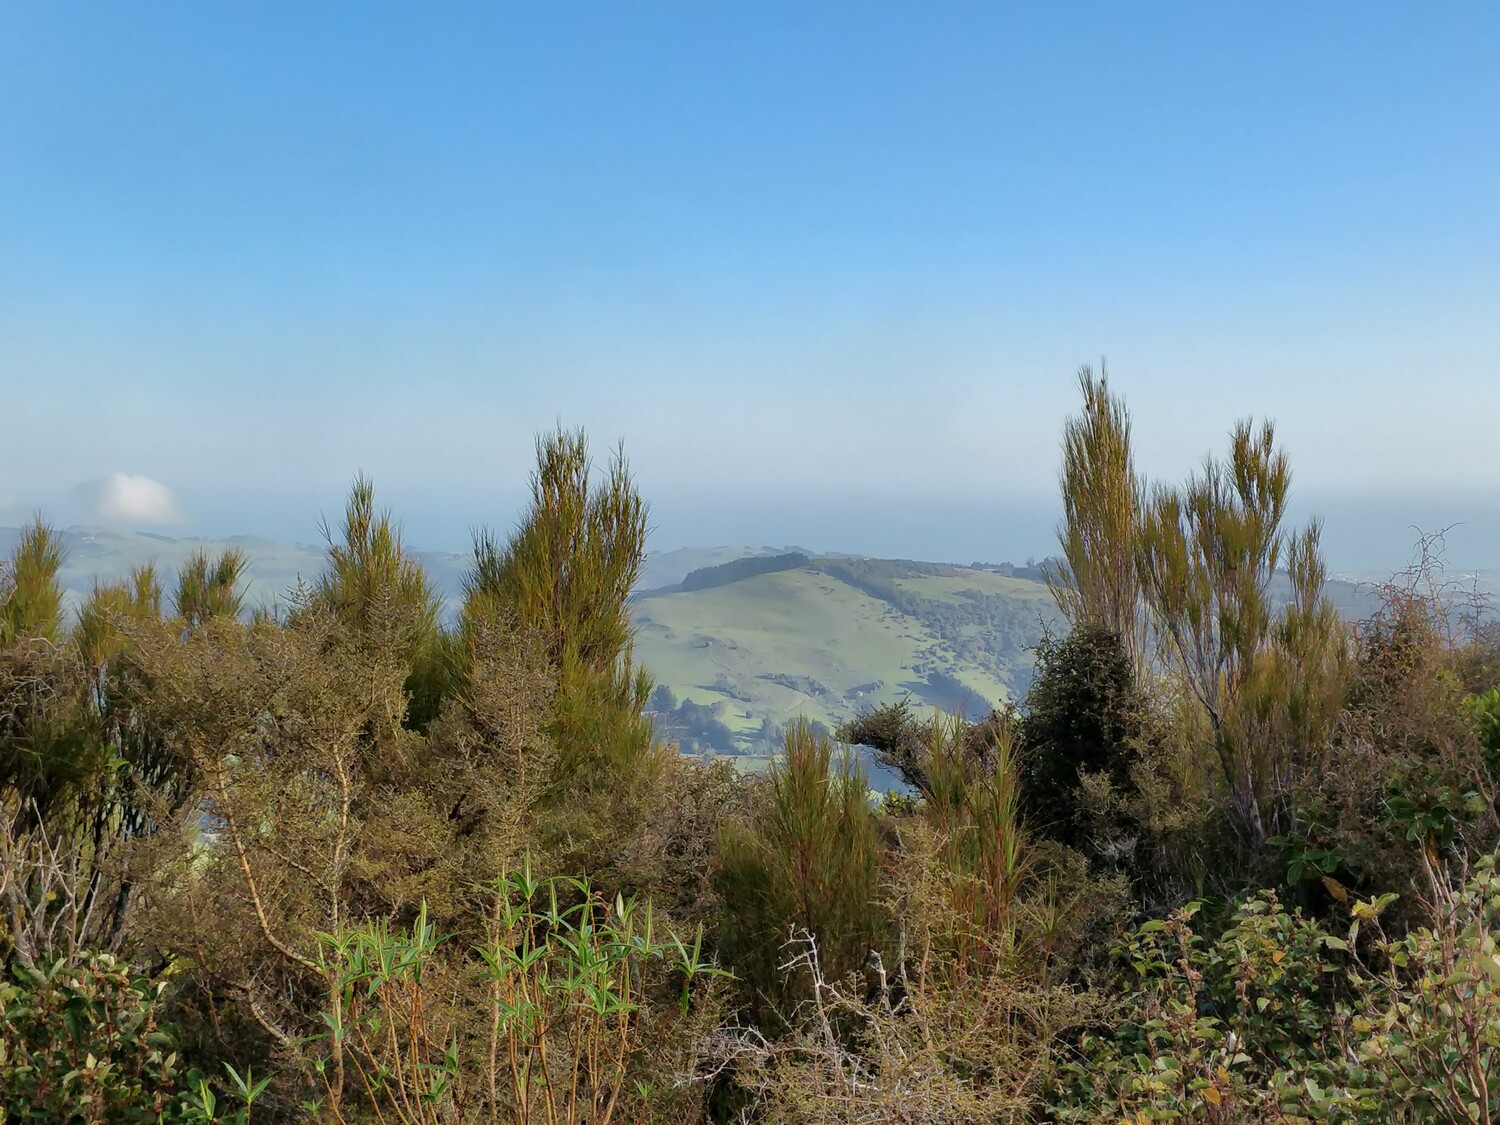 Looking at a green hill far away with blue gradient sky behind it. The hill is framed by plants close to the camera, and the camera is vertically higher up than the hill is, showing the hill's top.